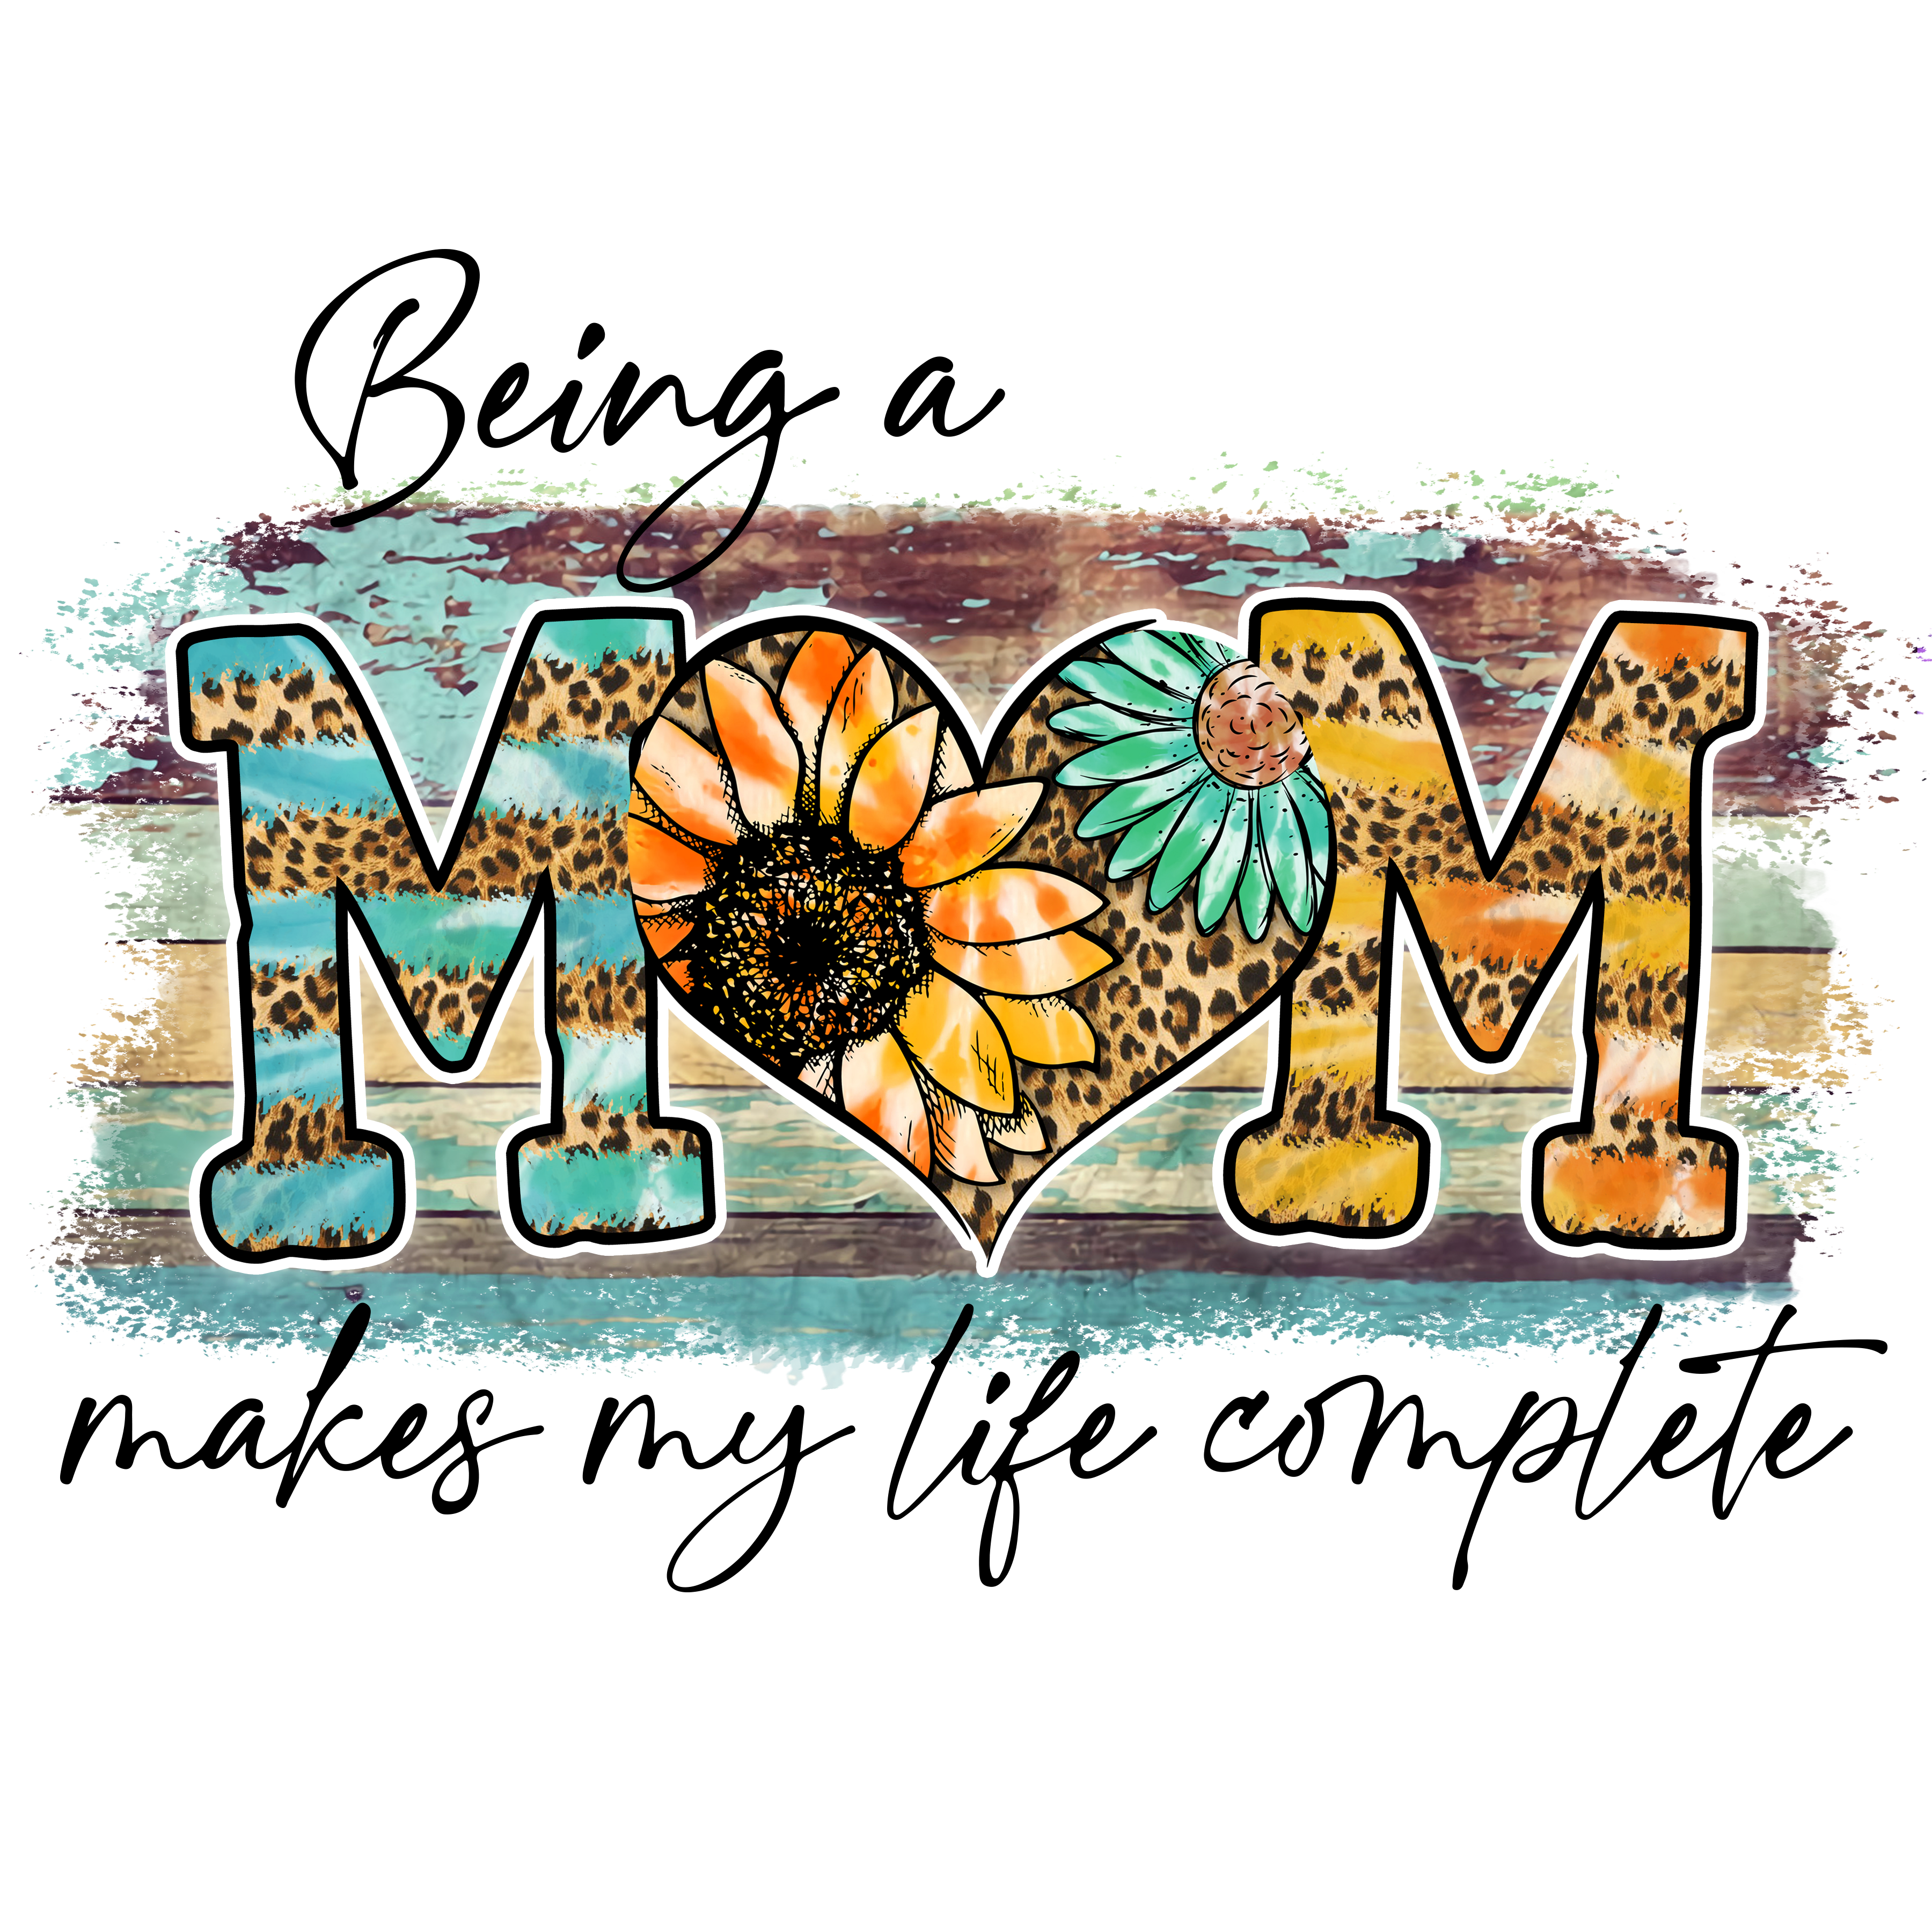 Sublimation Prints - Being a Mom - The Vinyl Haus